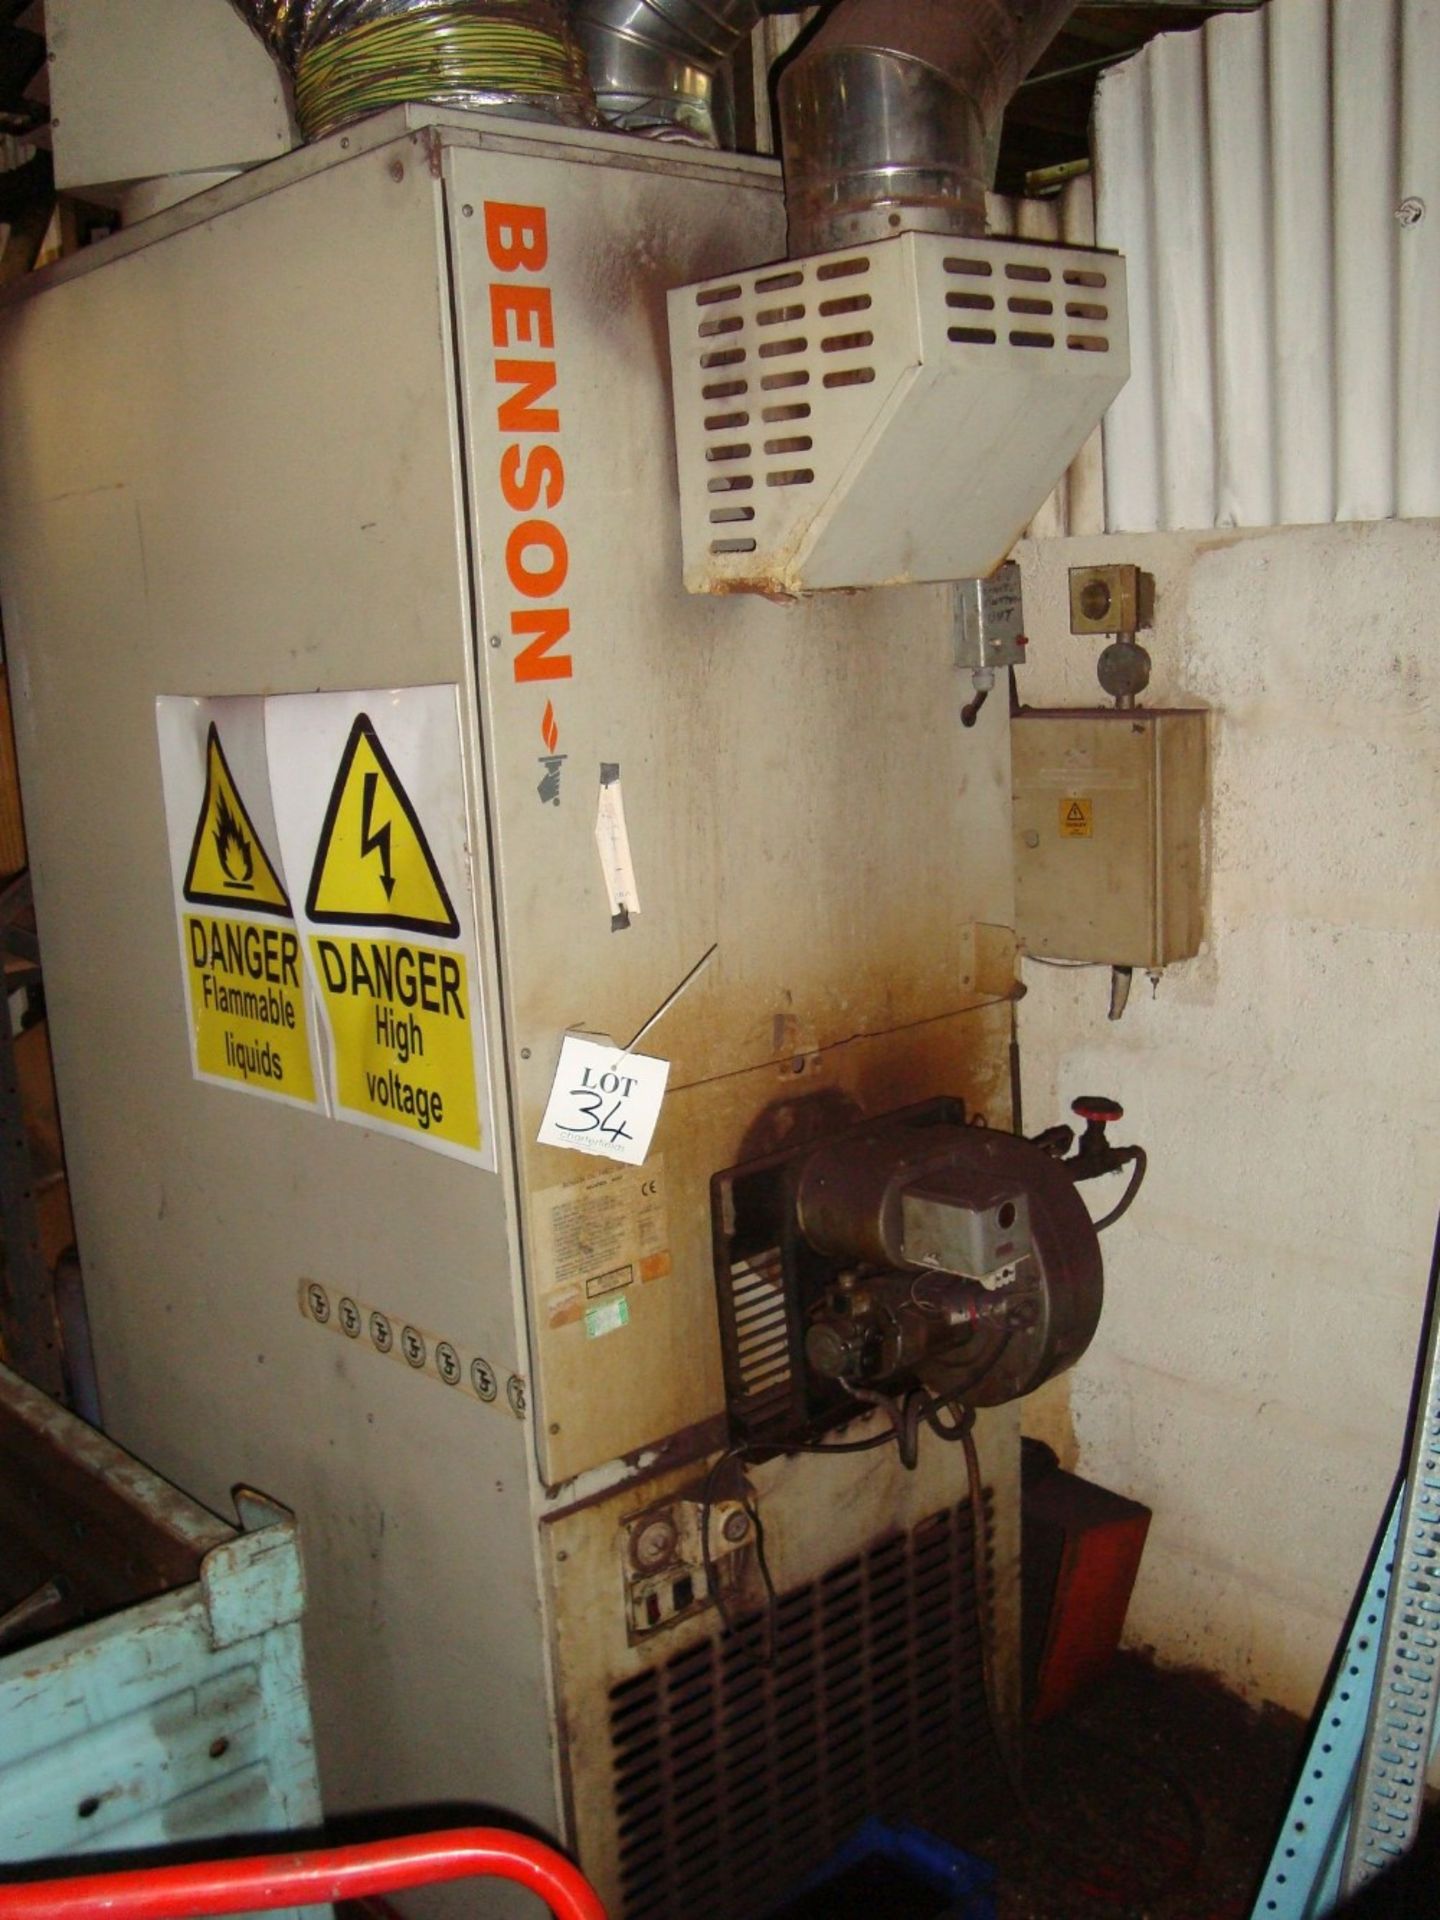 A Benson 400 oil fired space heater (METHOD STATEMENT AND RISK ASSESSMENT REQUIRED PRIOR TO